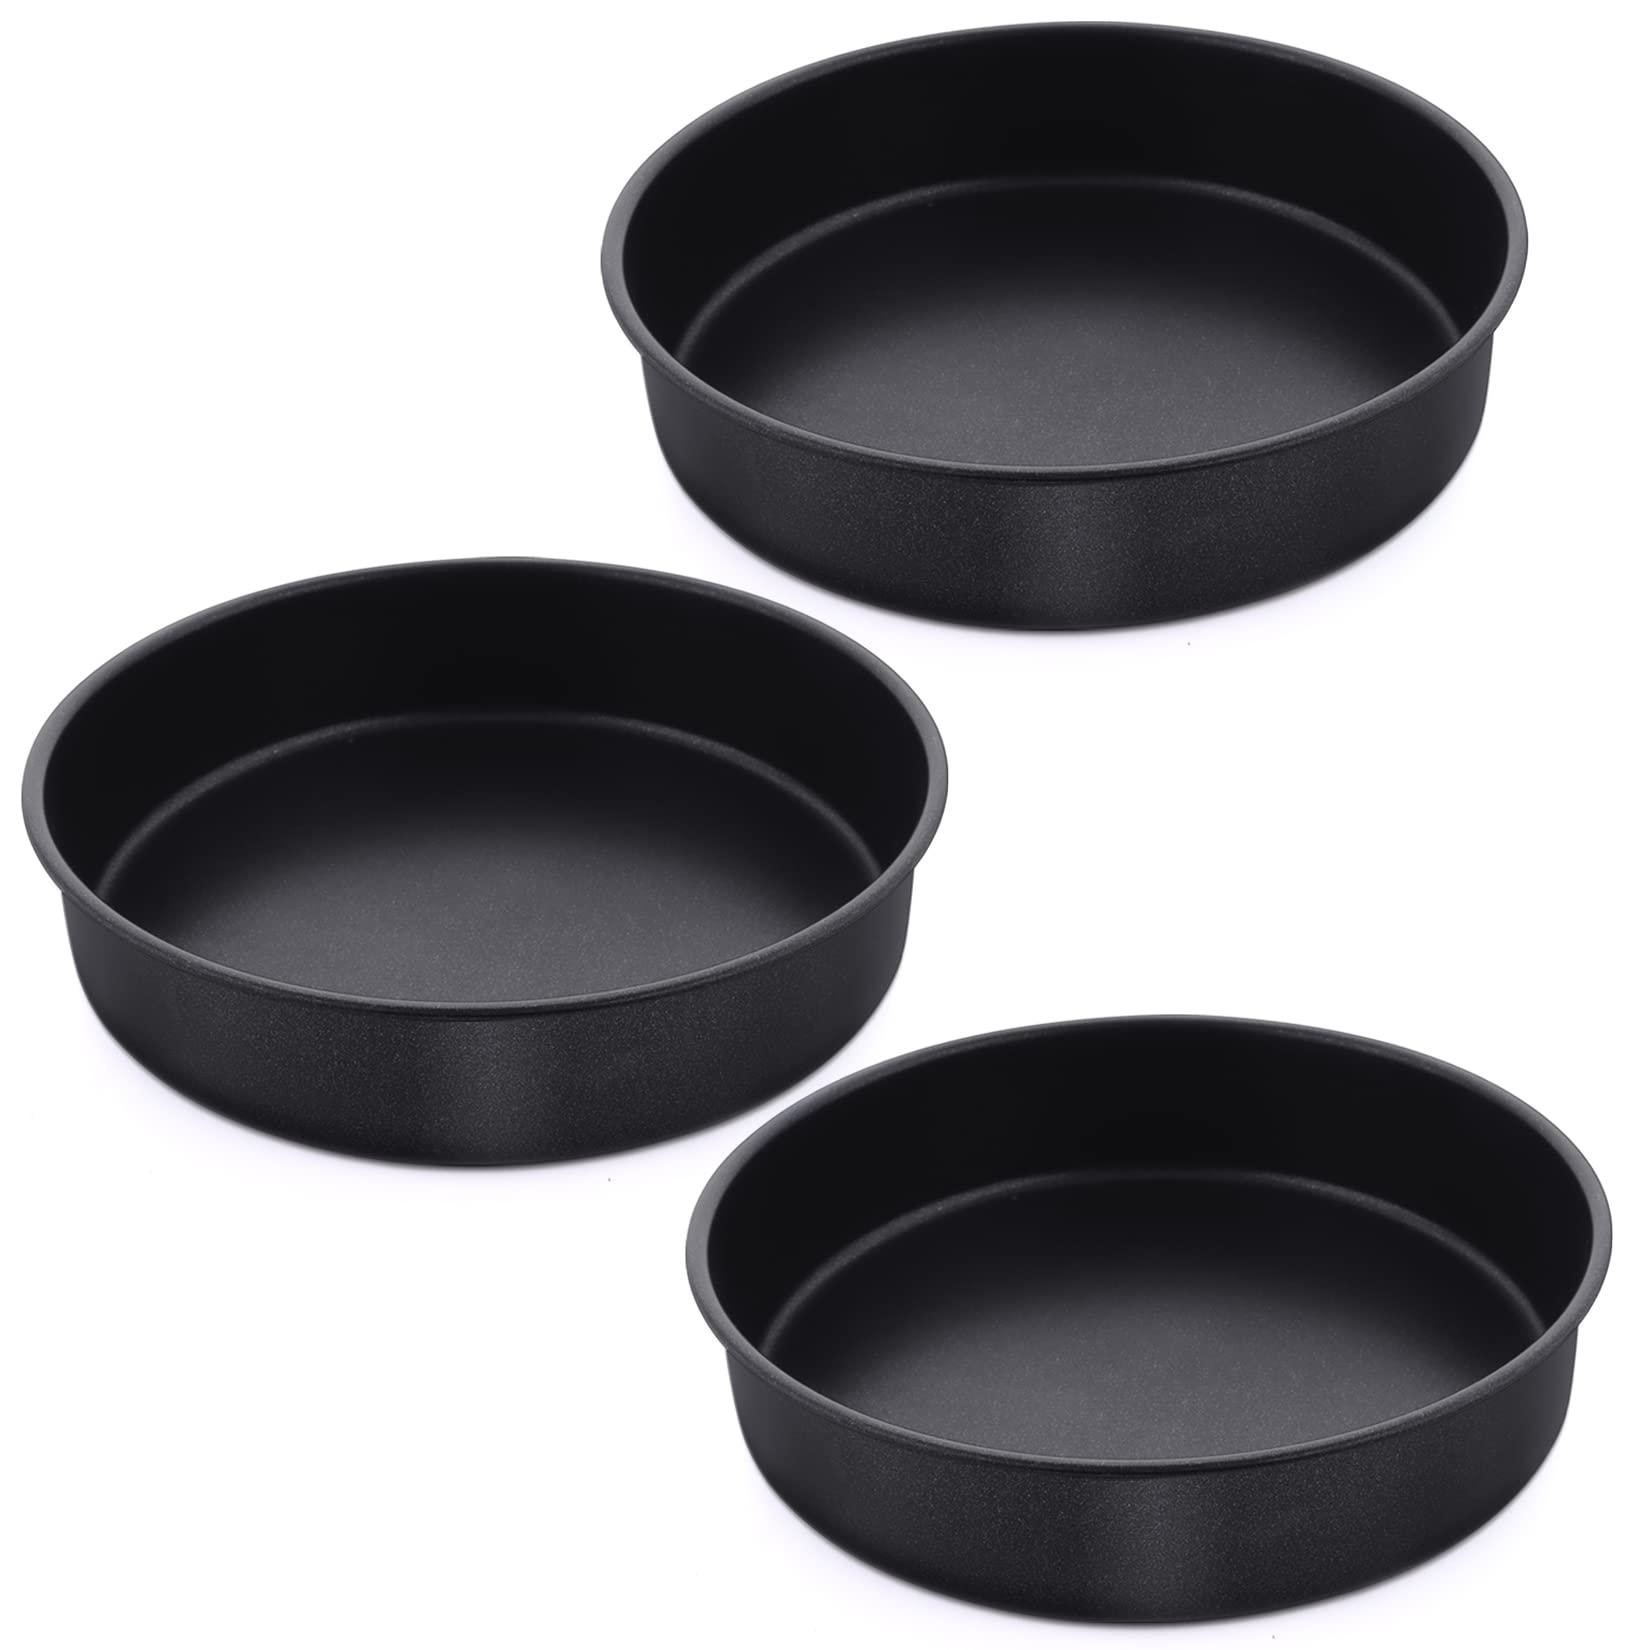 8 Inch Round Cake Pan Set, P&P CHEF 3 Piece Non-Stick Cake Baking Pans for Birthday Wedding Layer Cakes, Stainless Steel Core & One-piece Design, Sturdy & Healthy, Black - CookCave